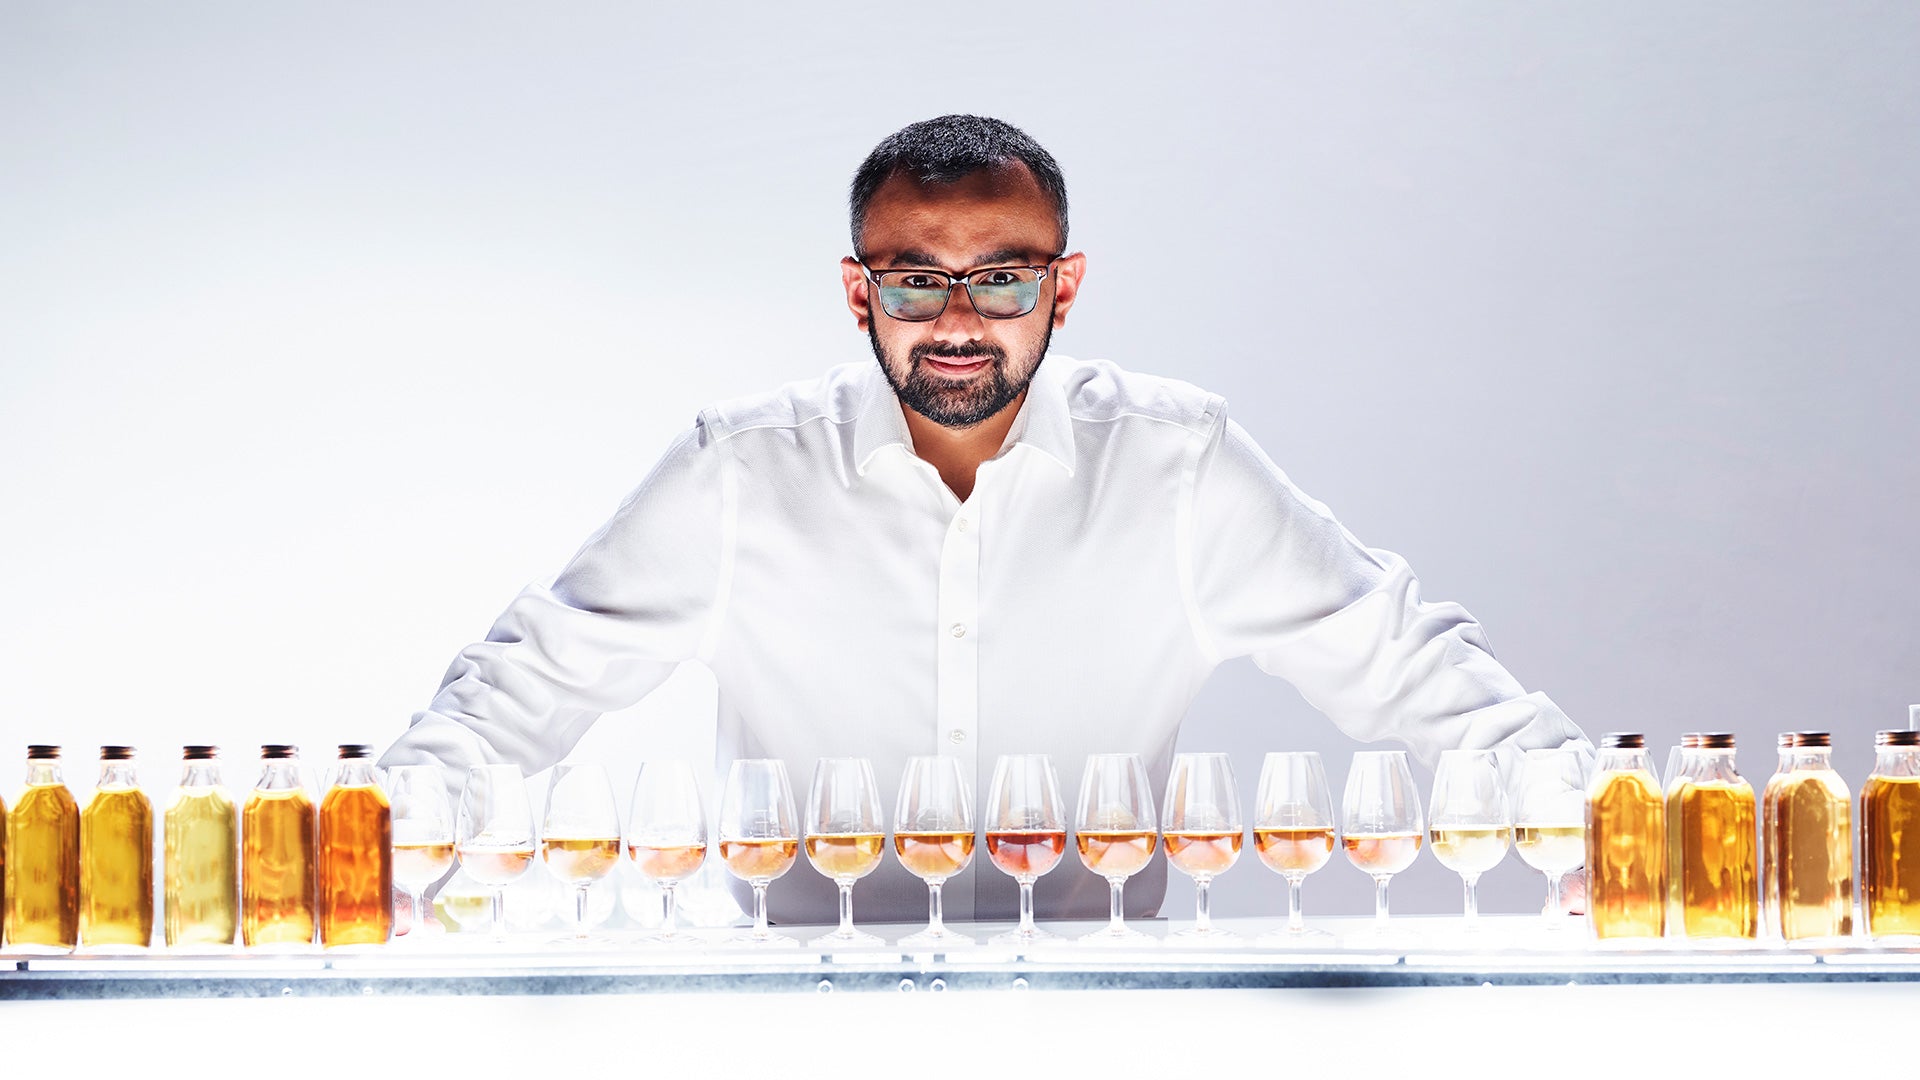 Meet our Whiskymaker - a man of science and art